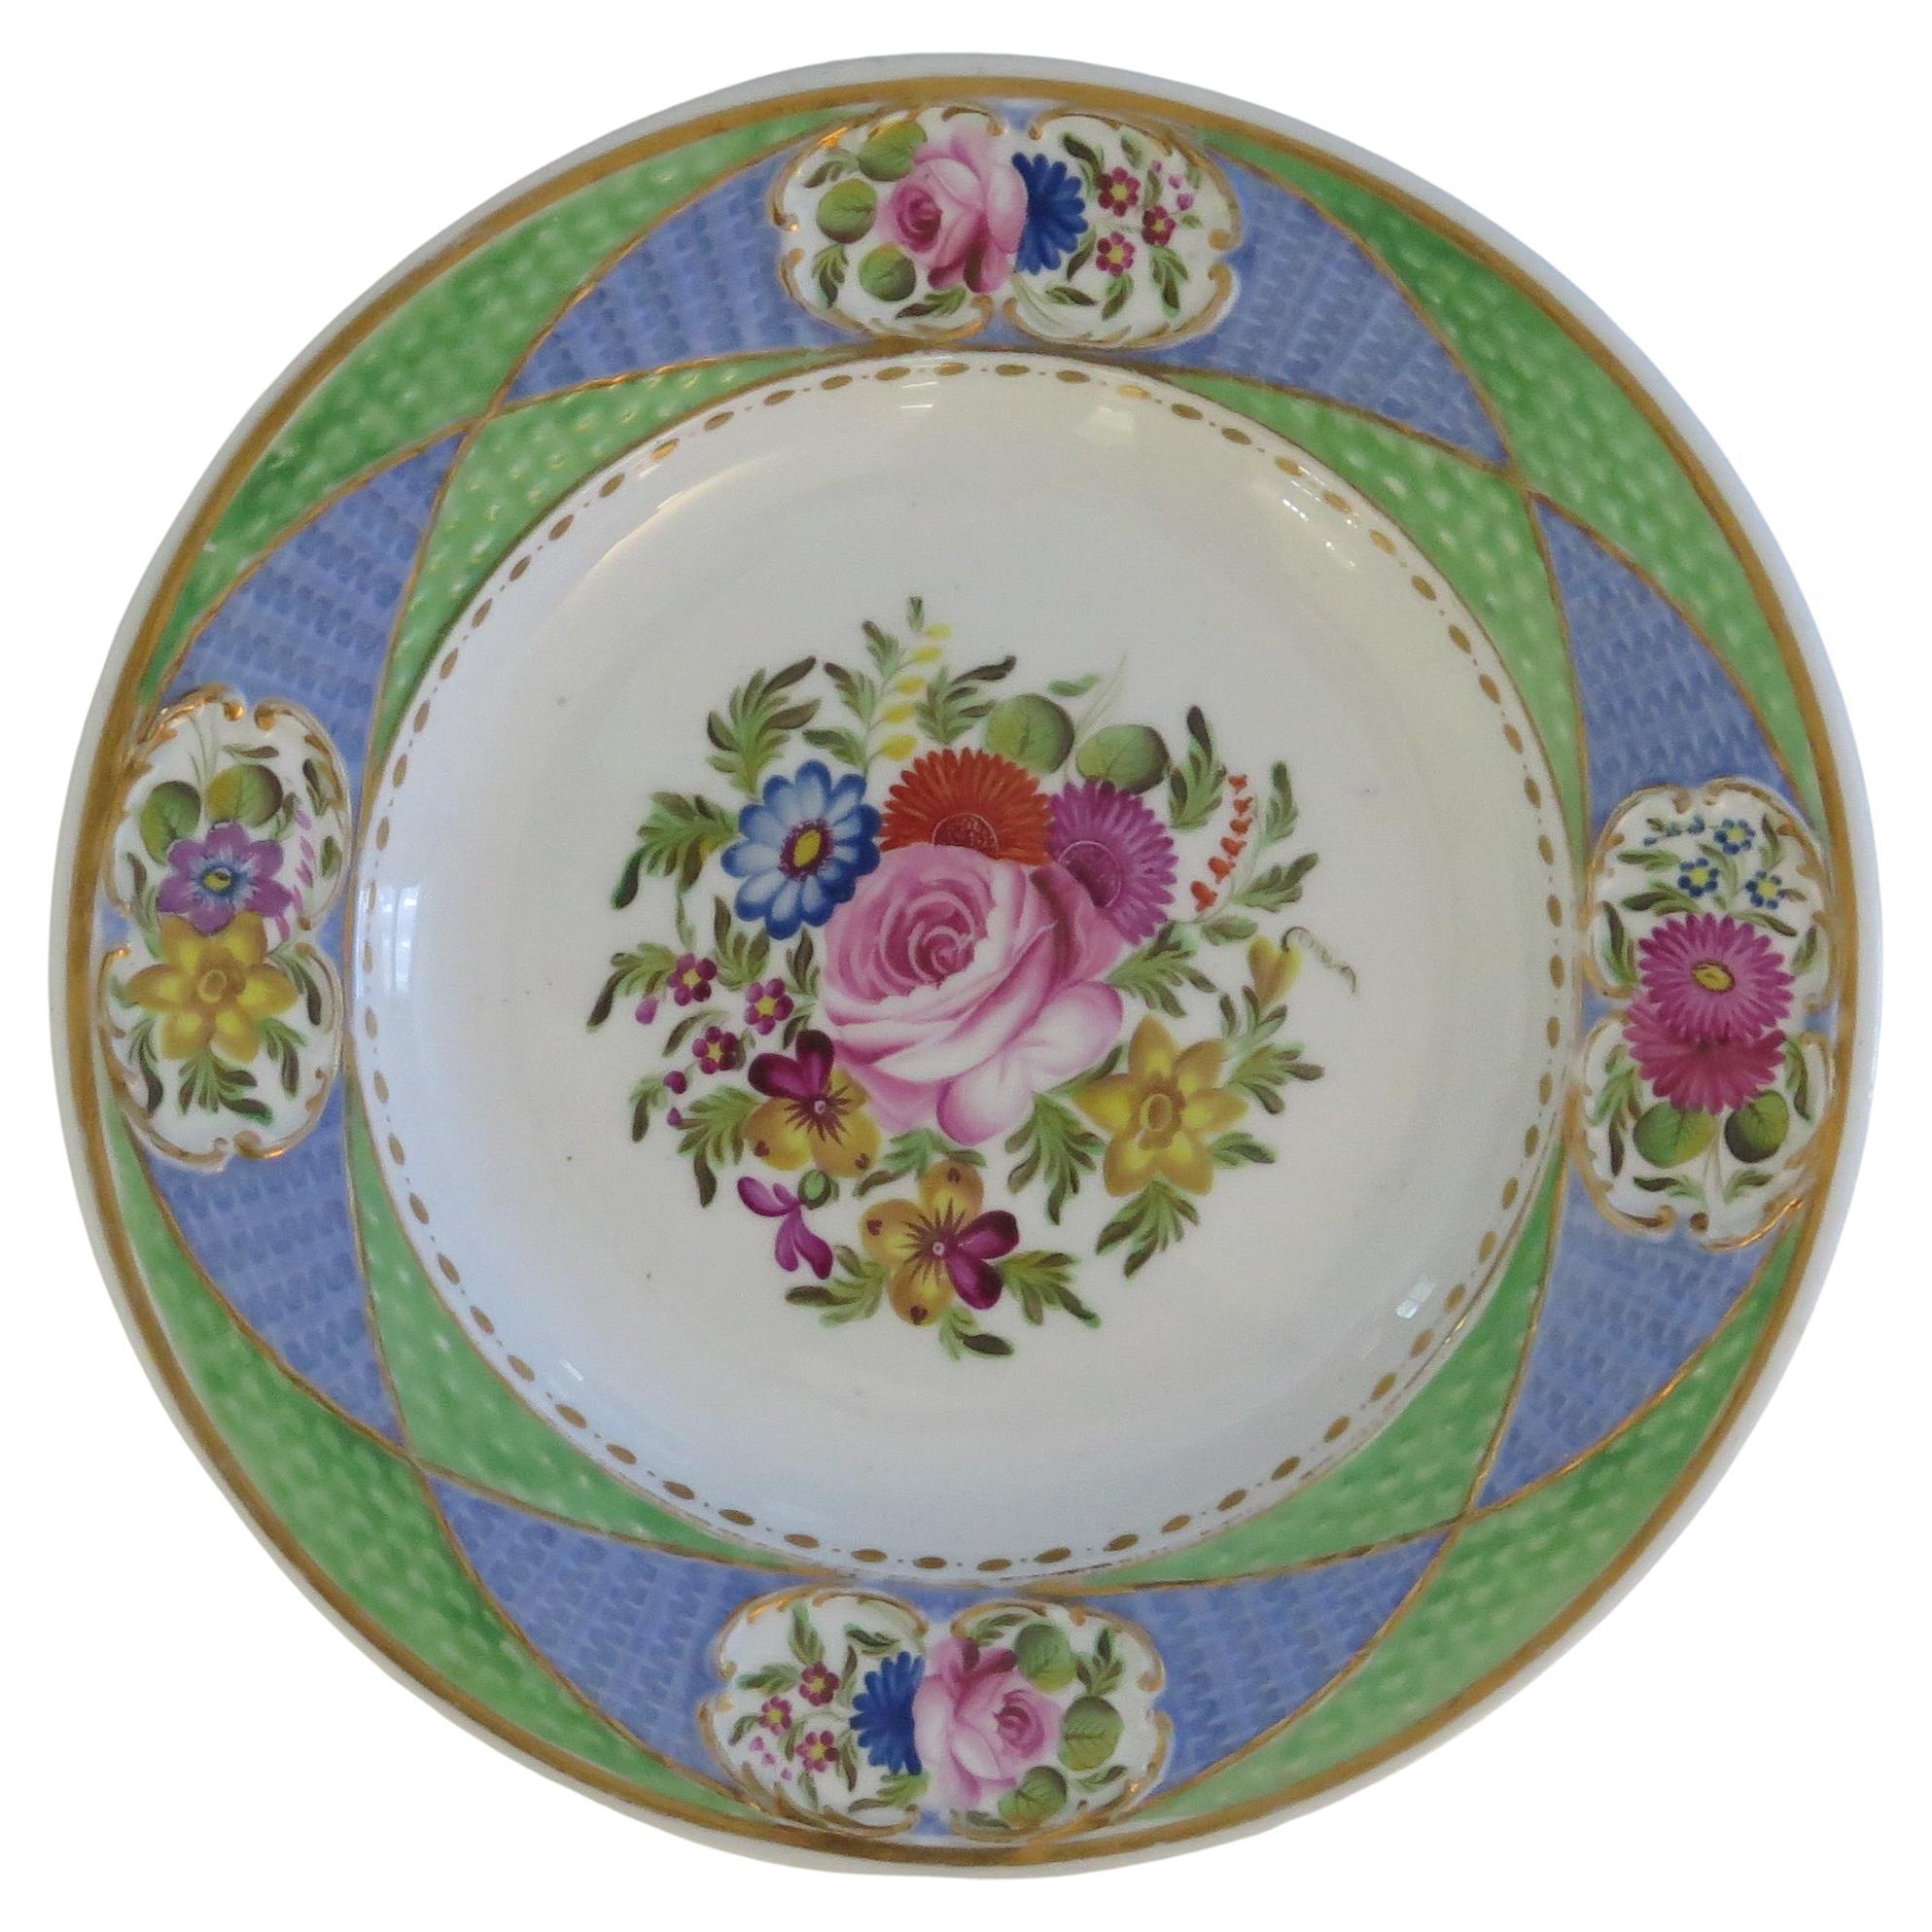 Fine Newhall Porcelain Plate Hand Painted Pattern 2050, Georgian circa 1820